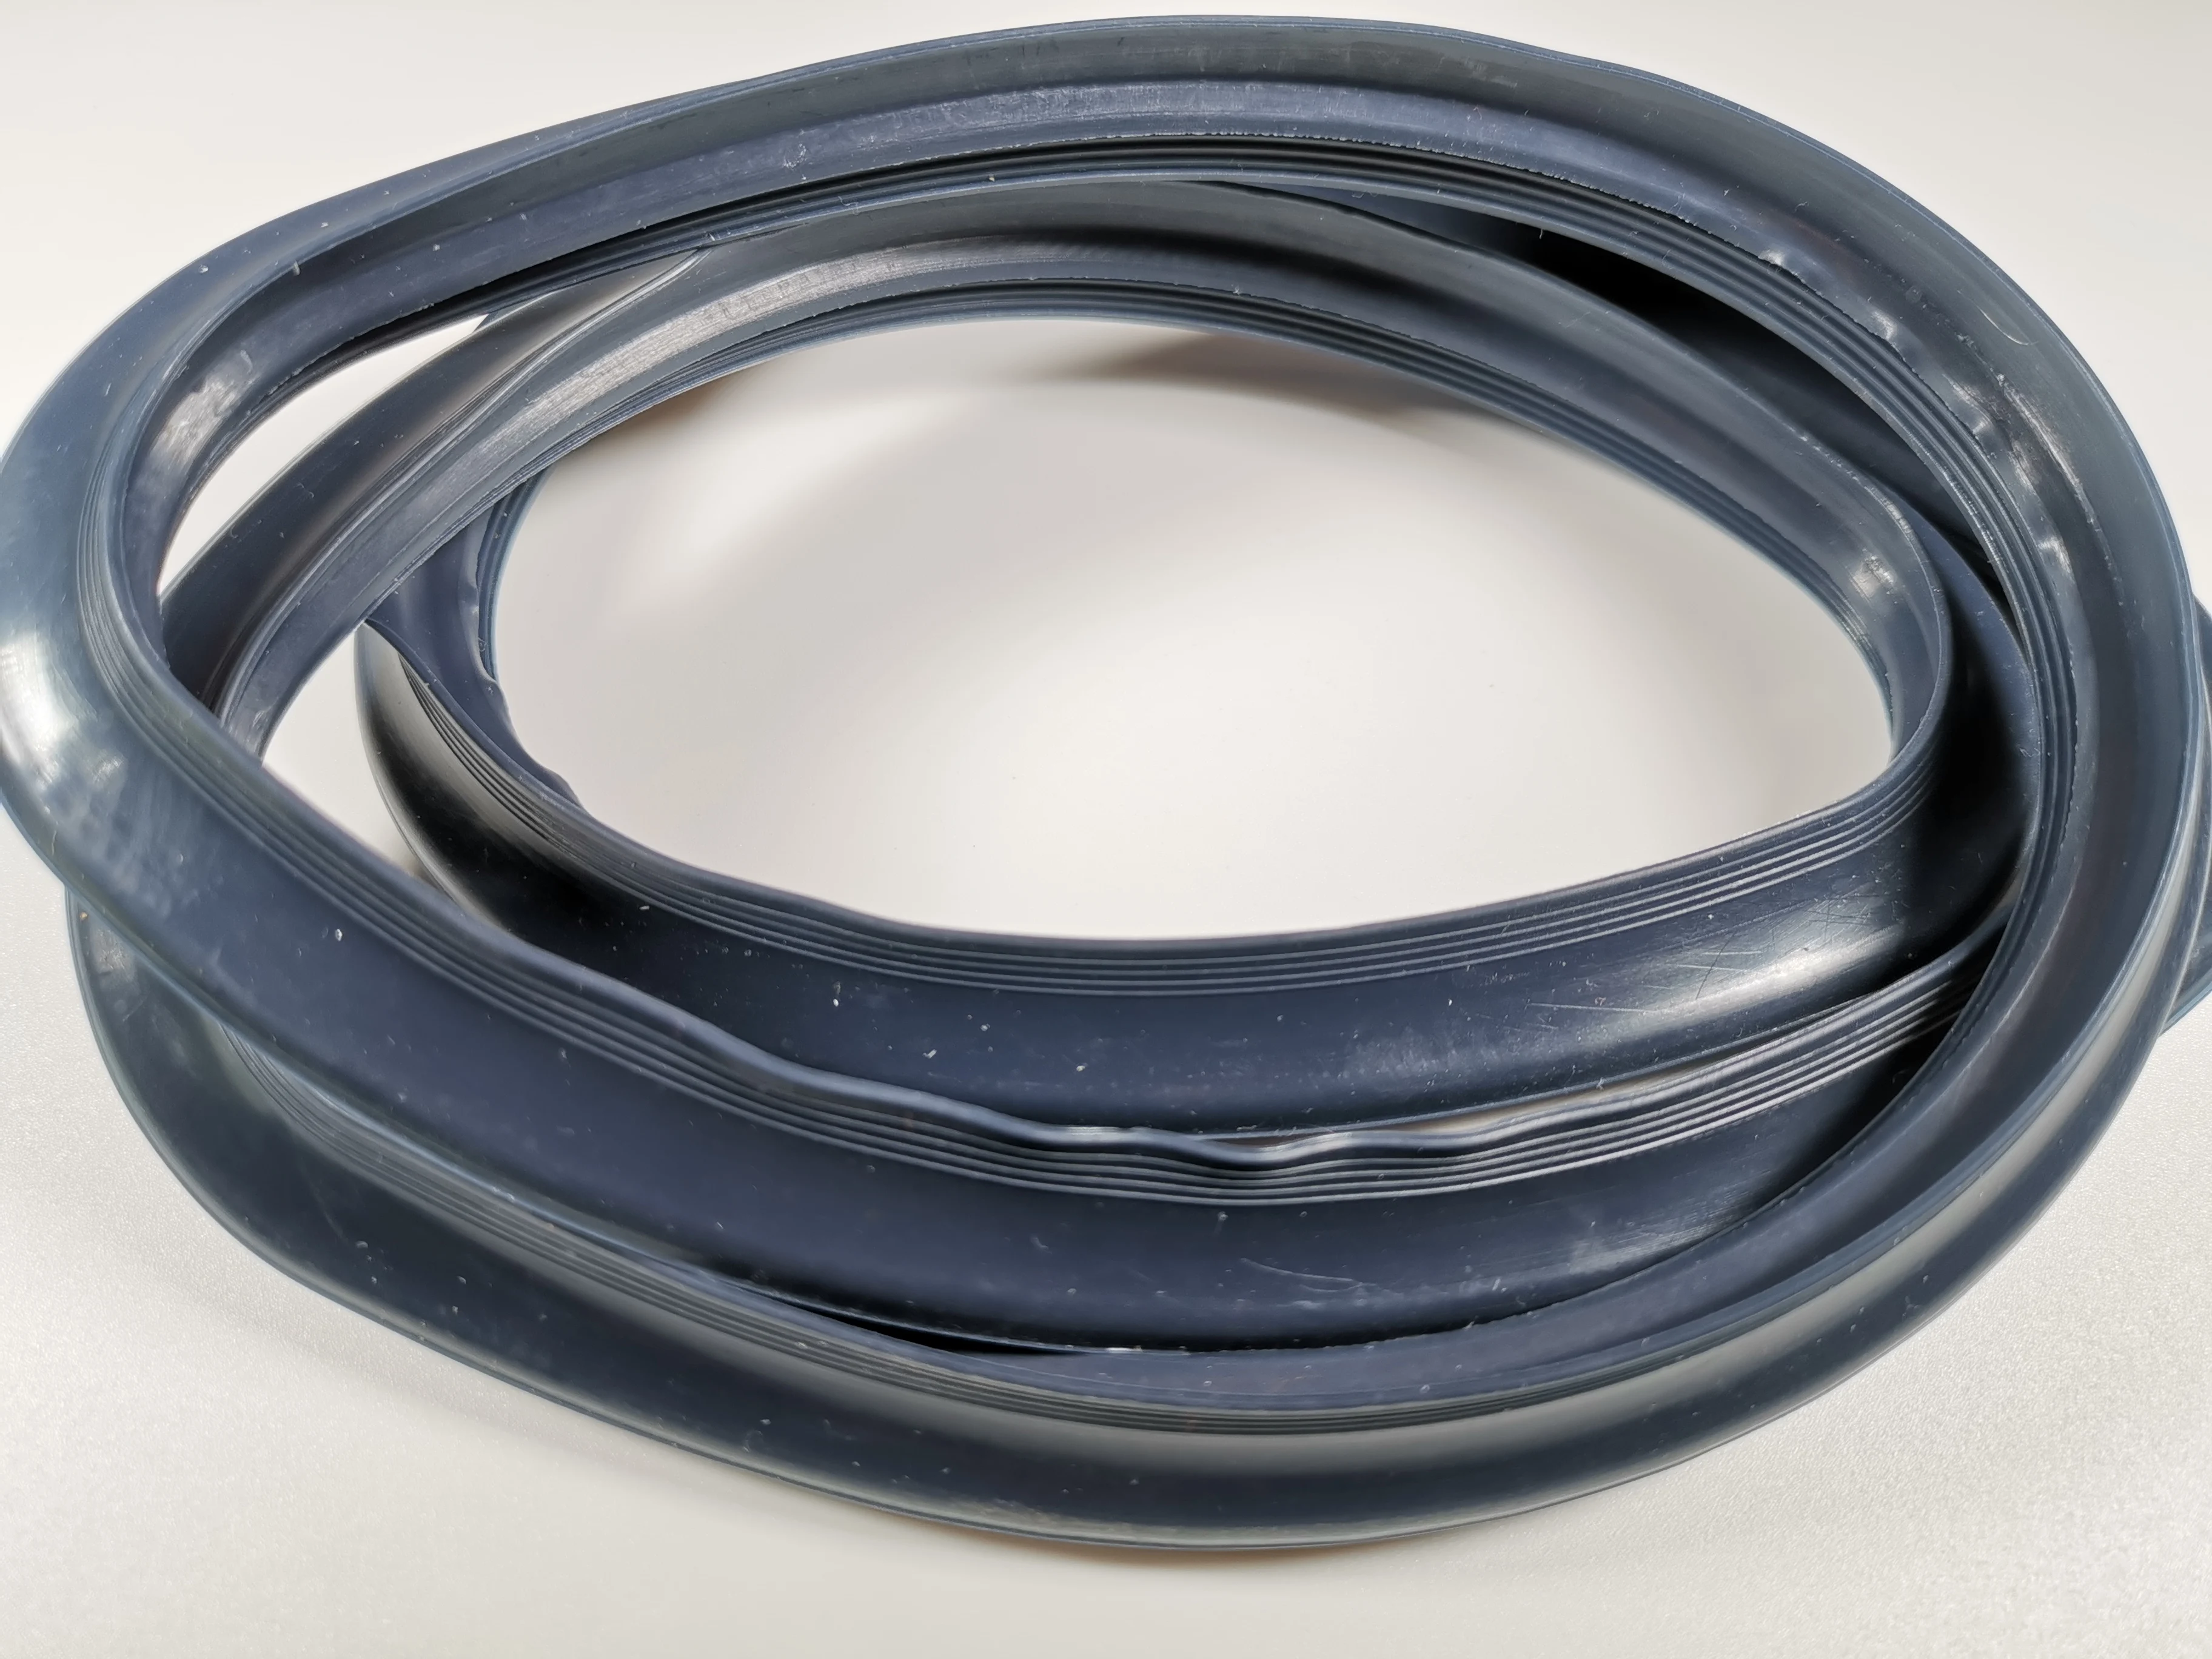 High quality and inexpensive silicone oven door gasket